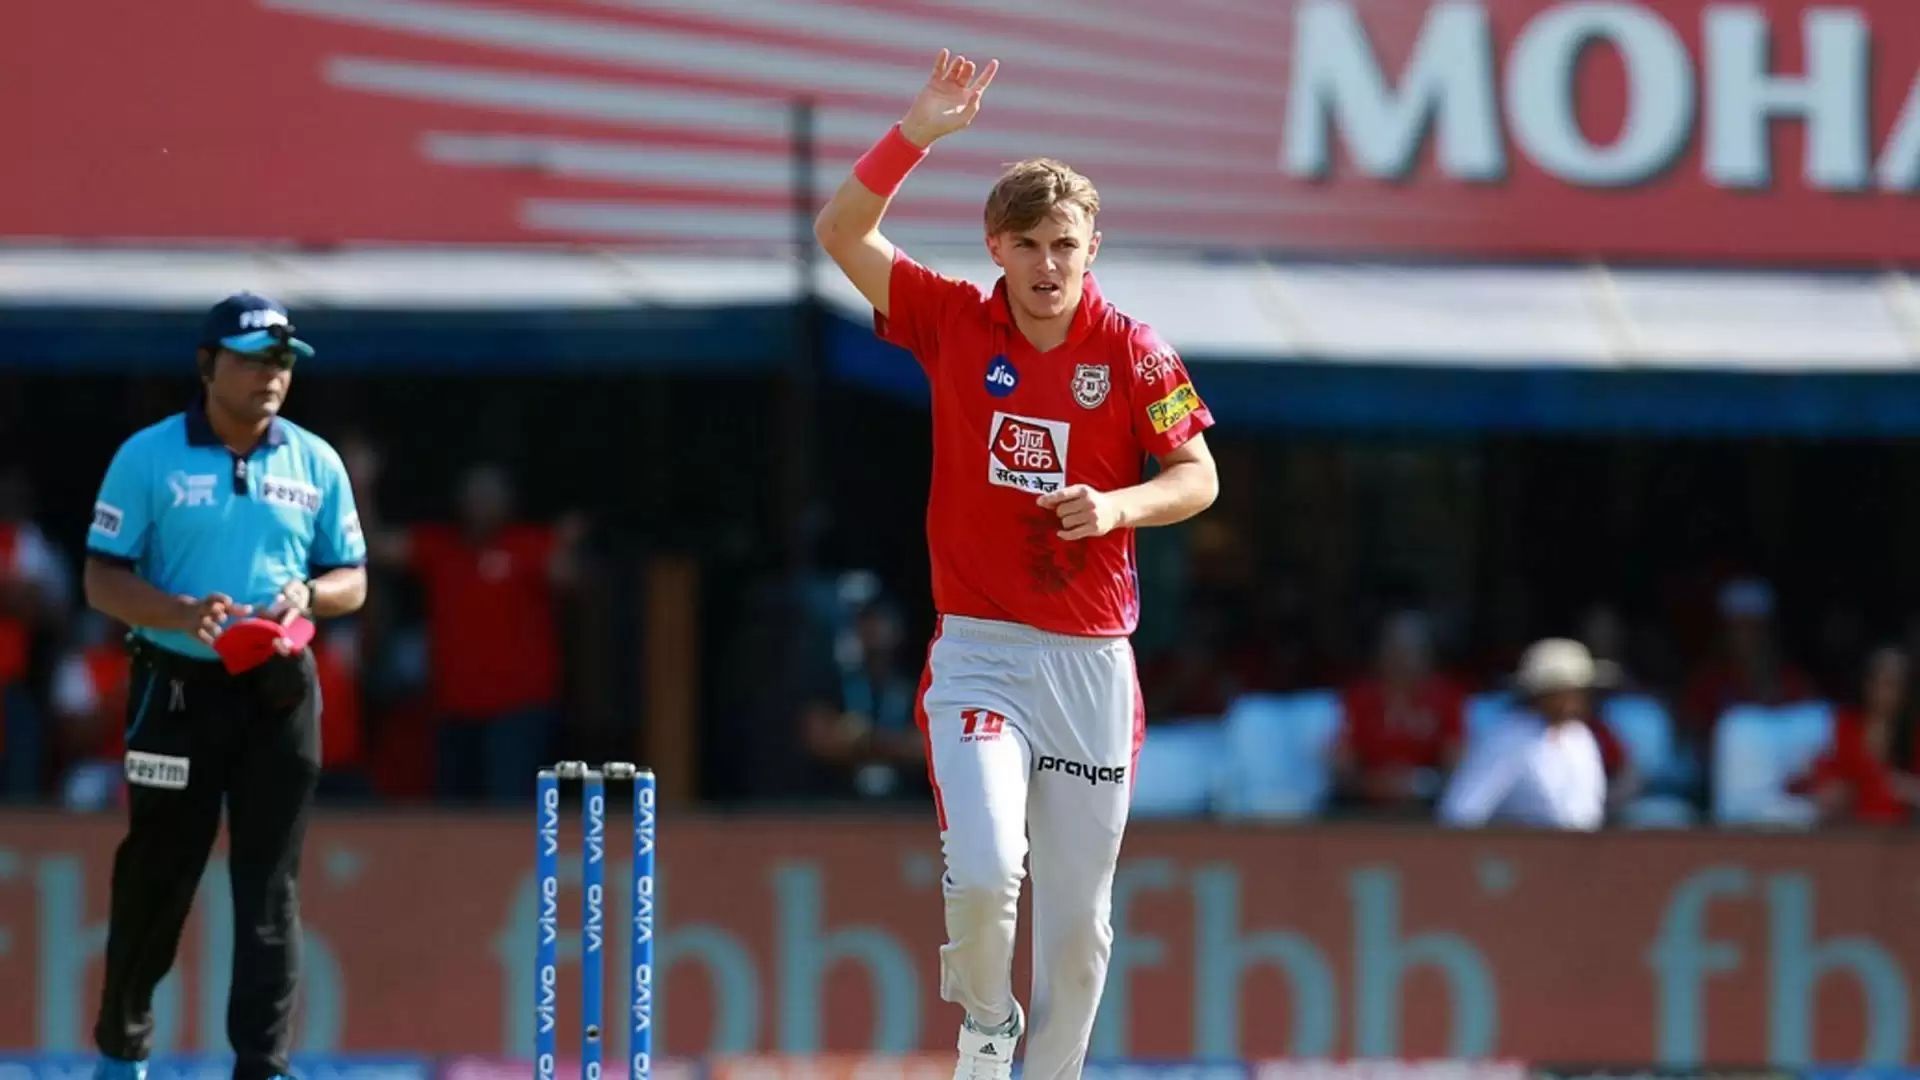 Sam Curran is set for a second stint with the Punjab franchise